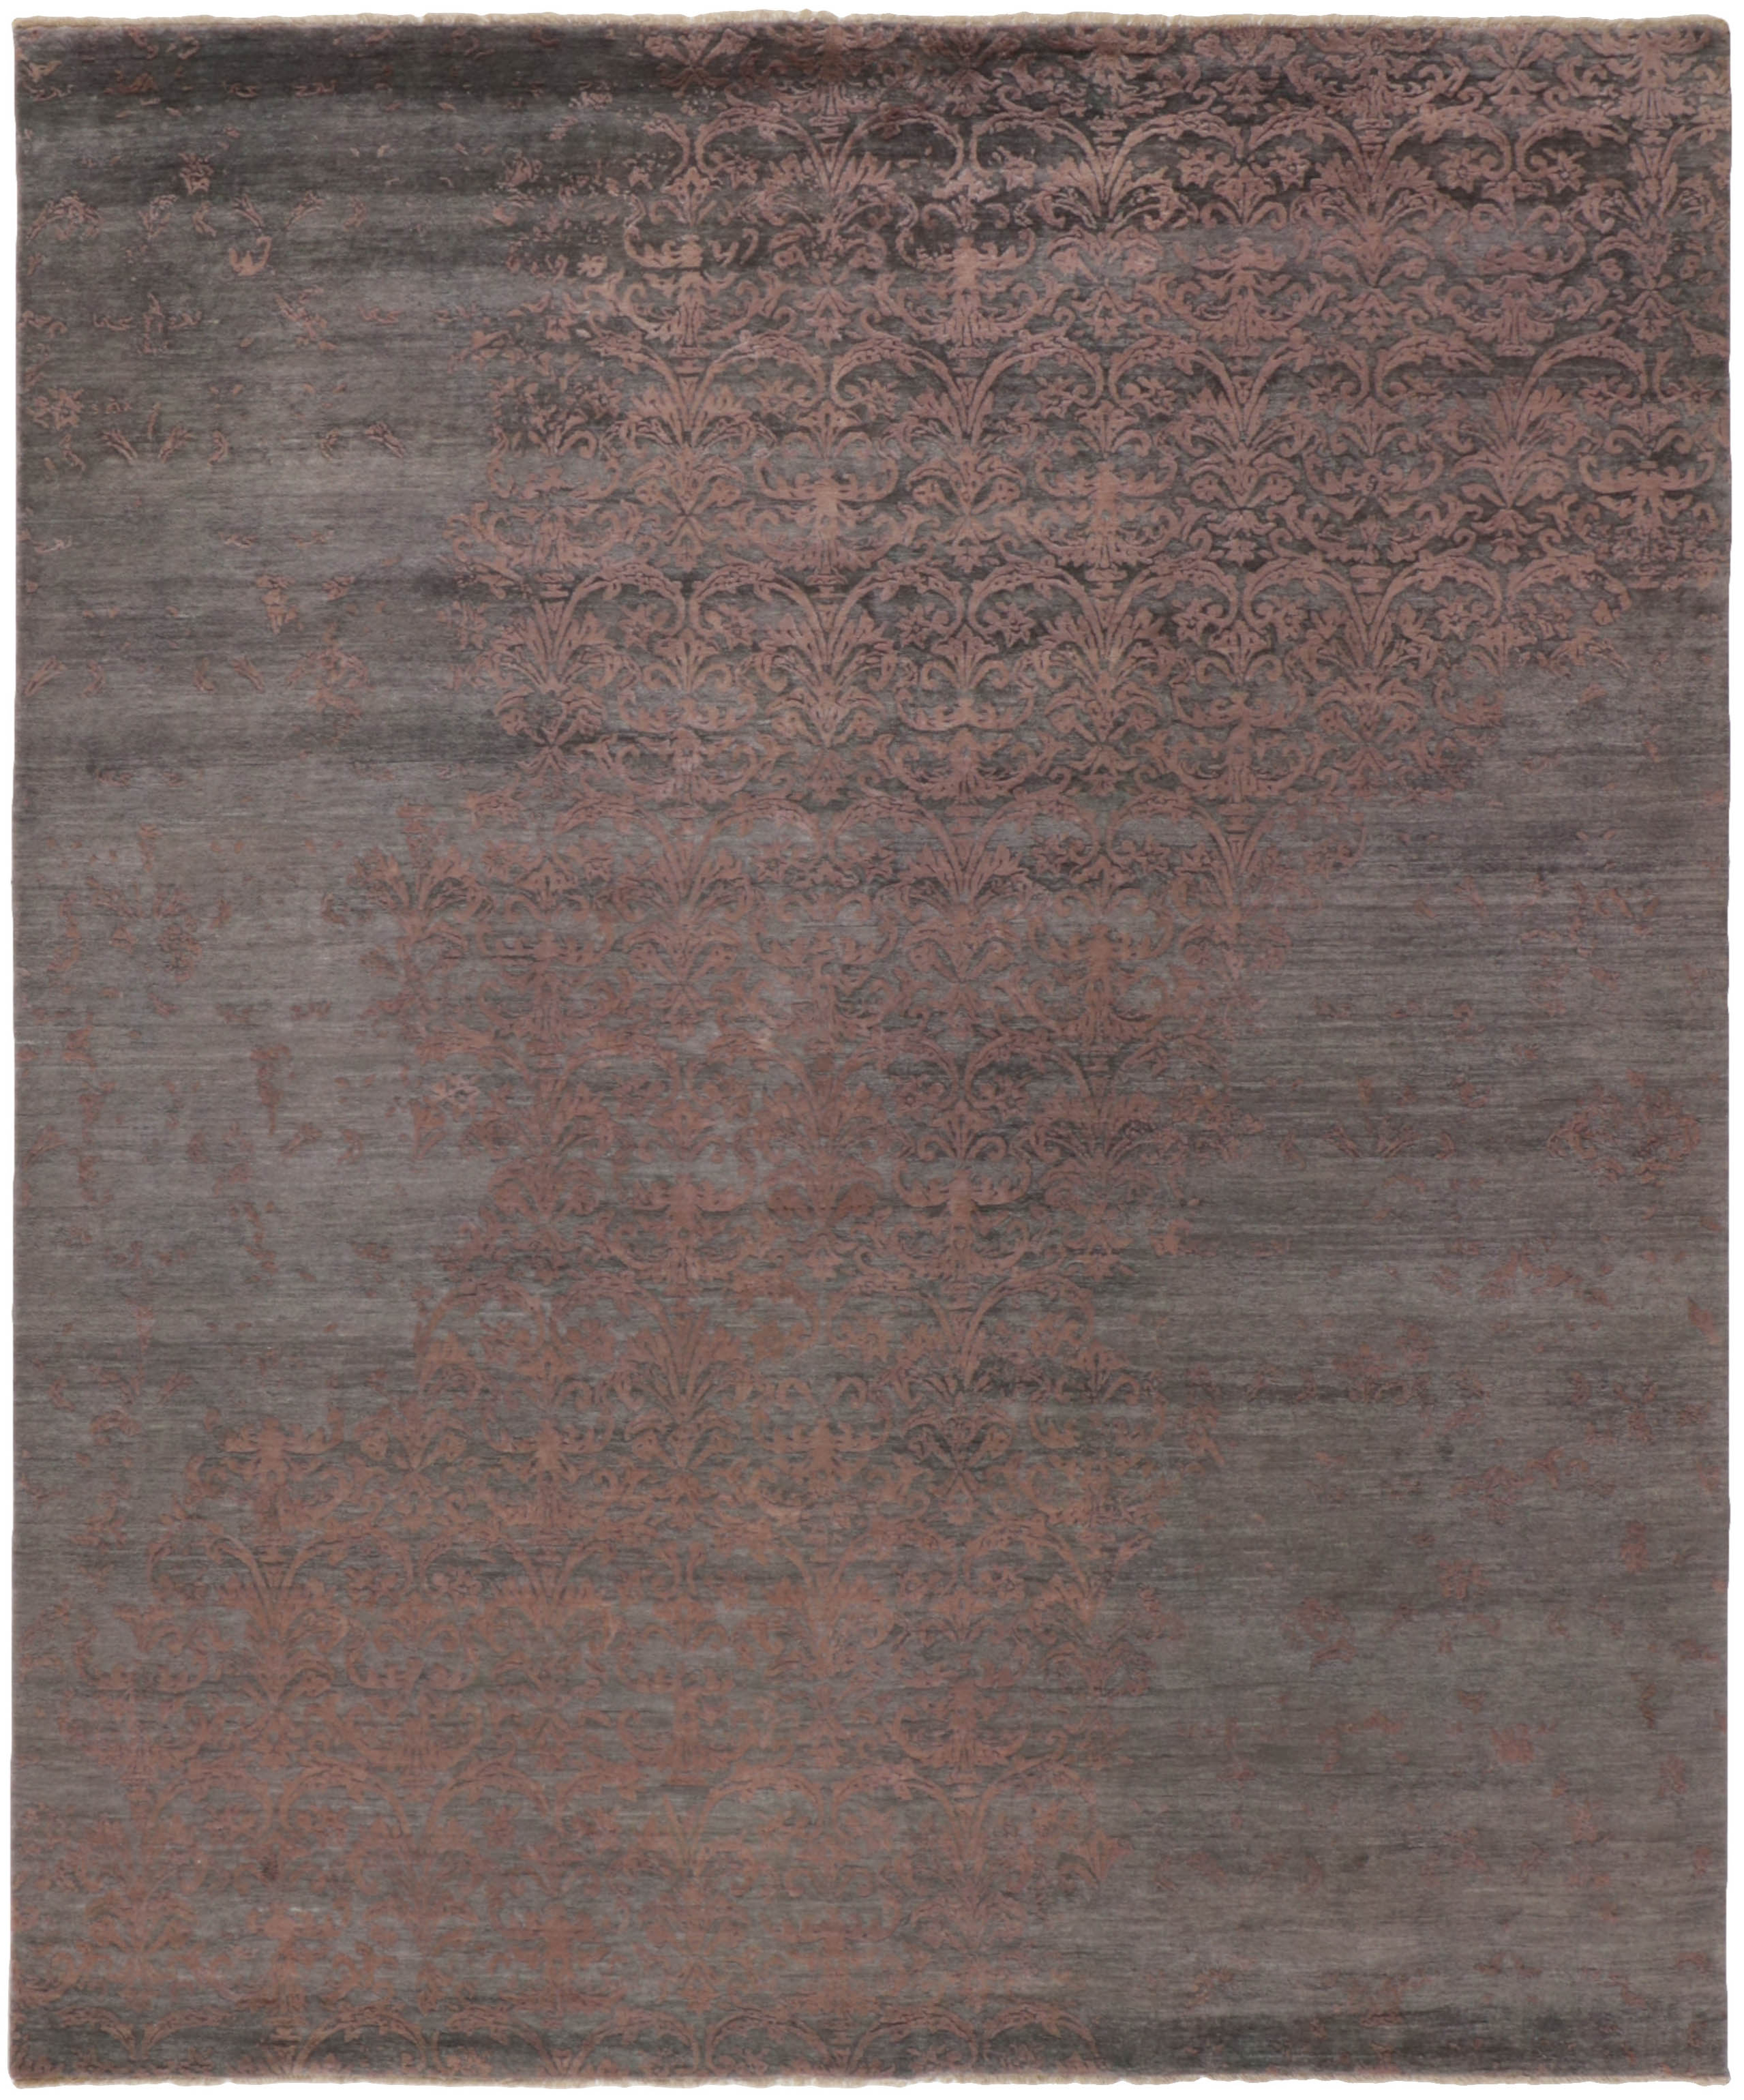 Authentic oriental rug with a damask pattern in brown